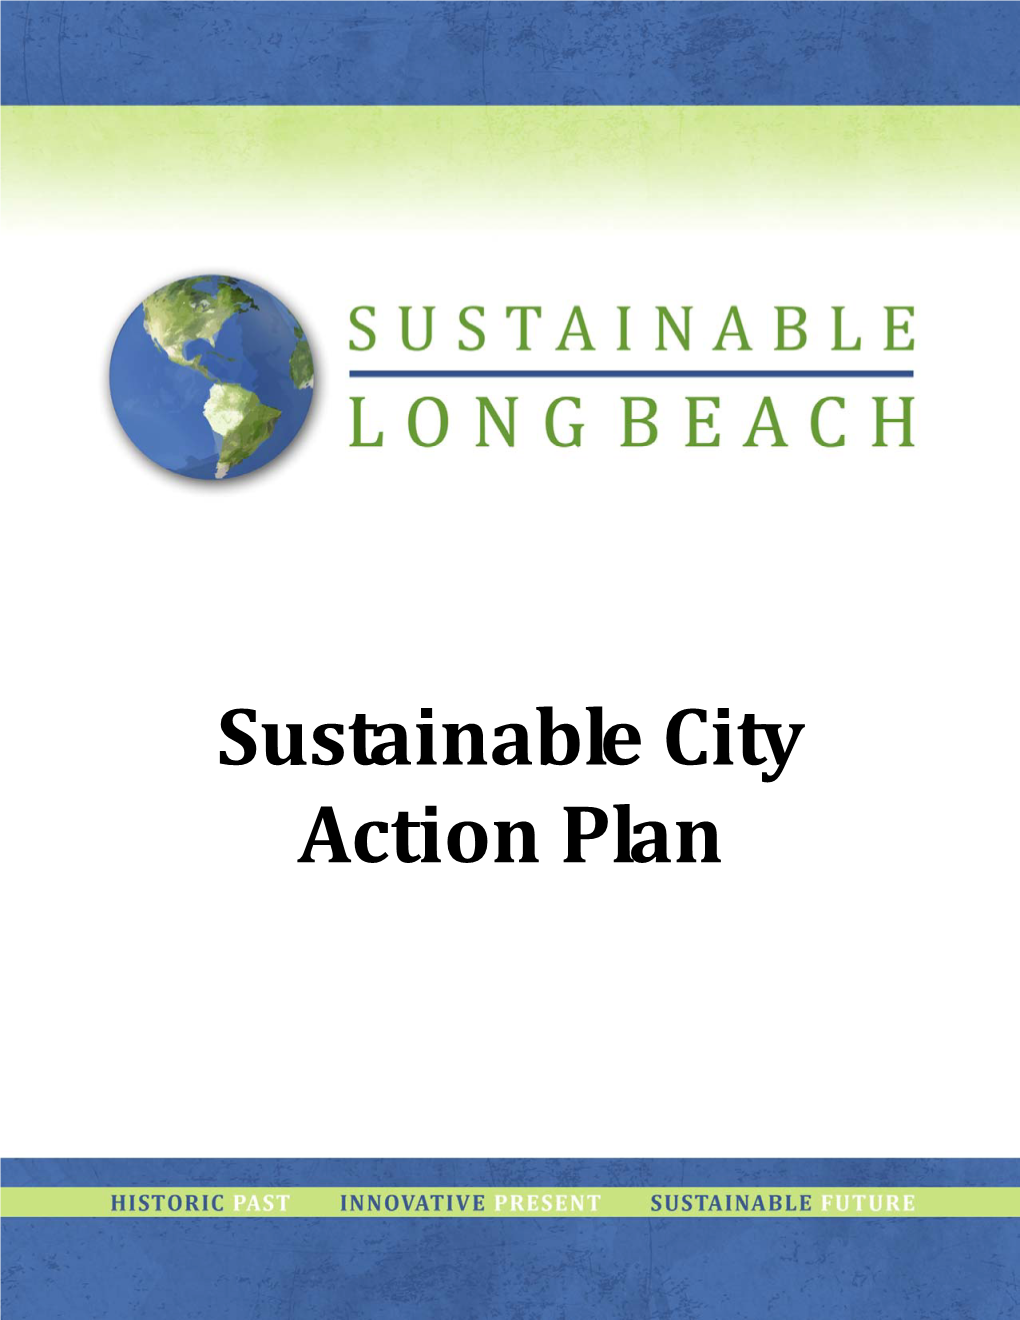 Long Beach Sustainable City Action Plan (SCAP)